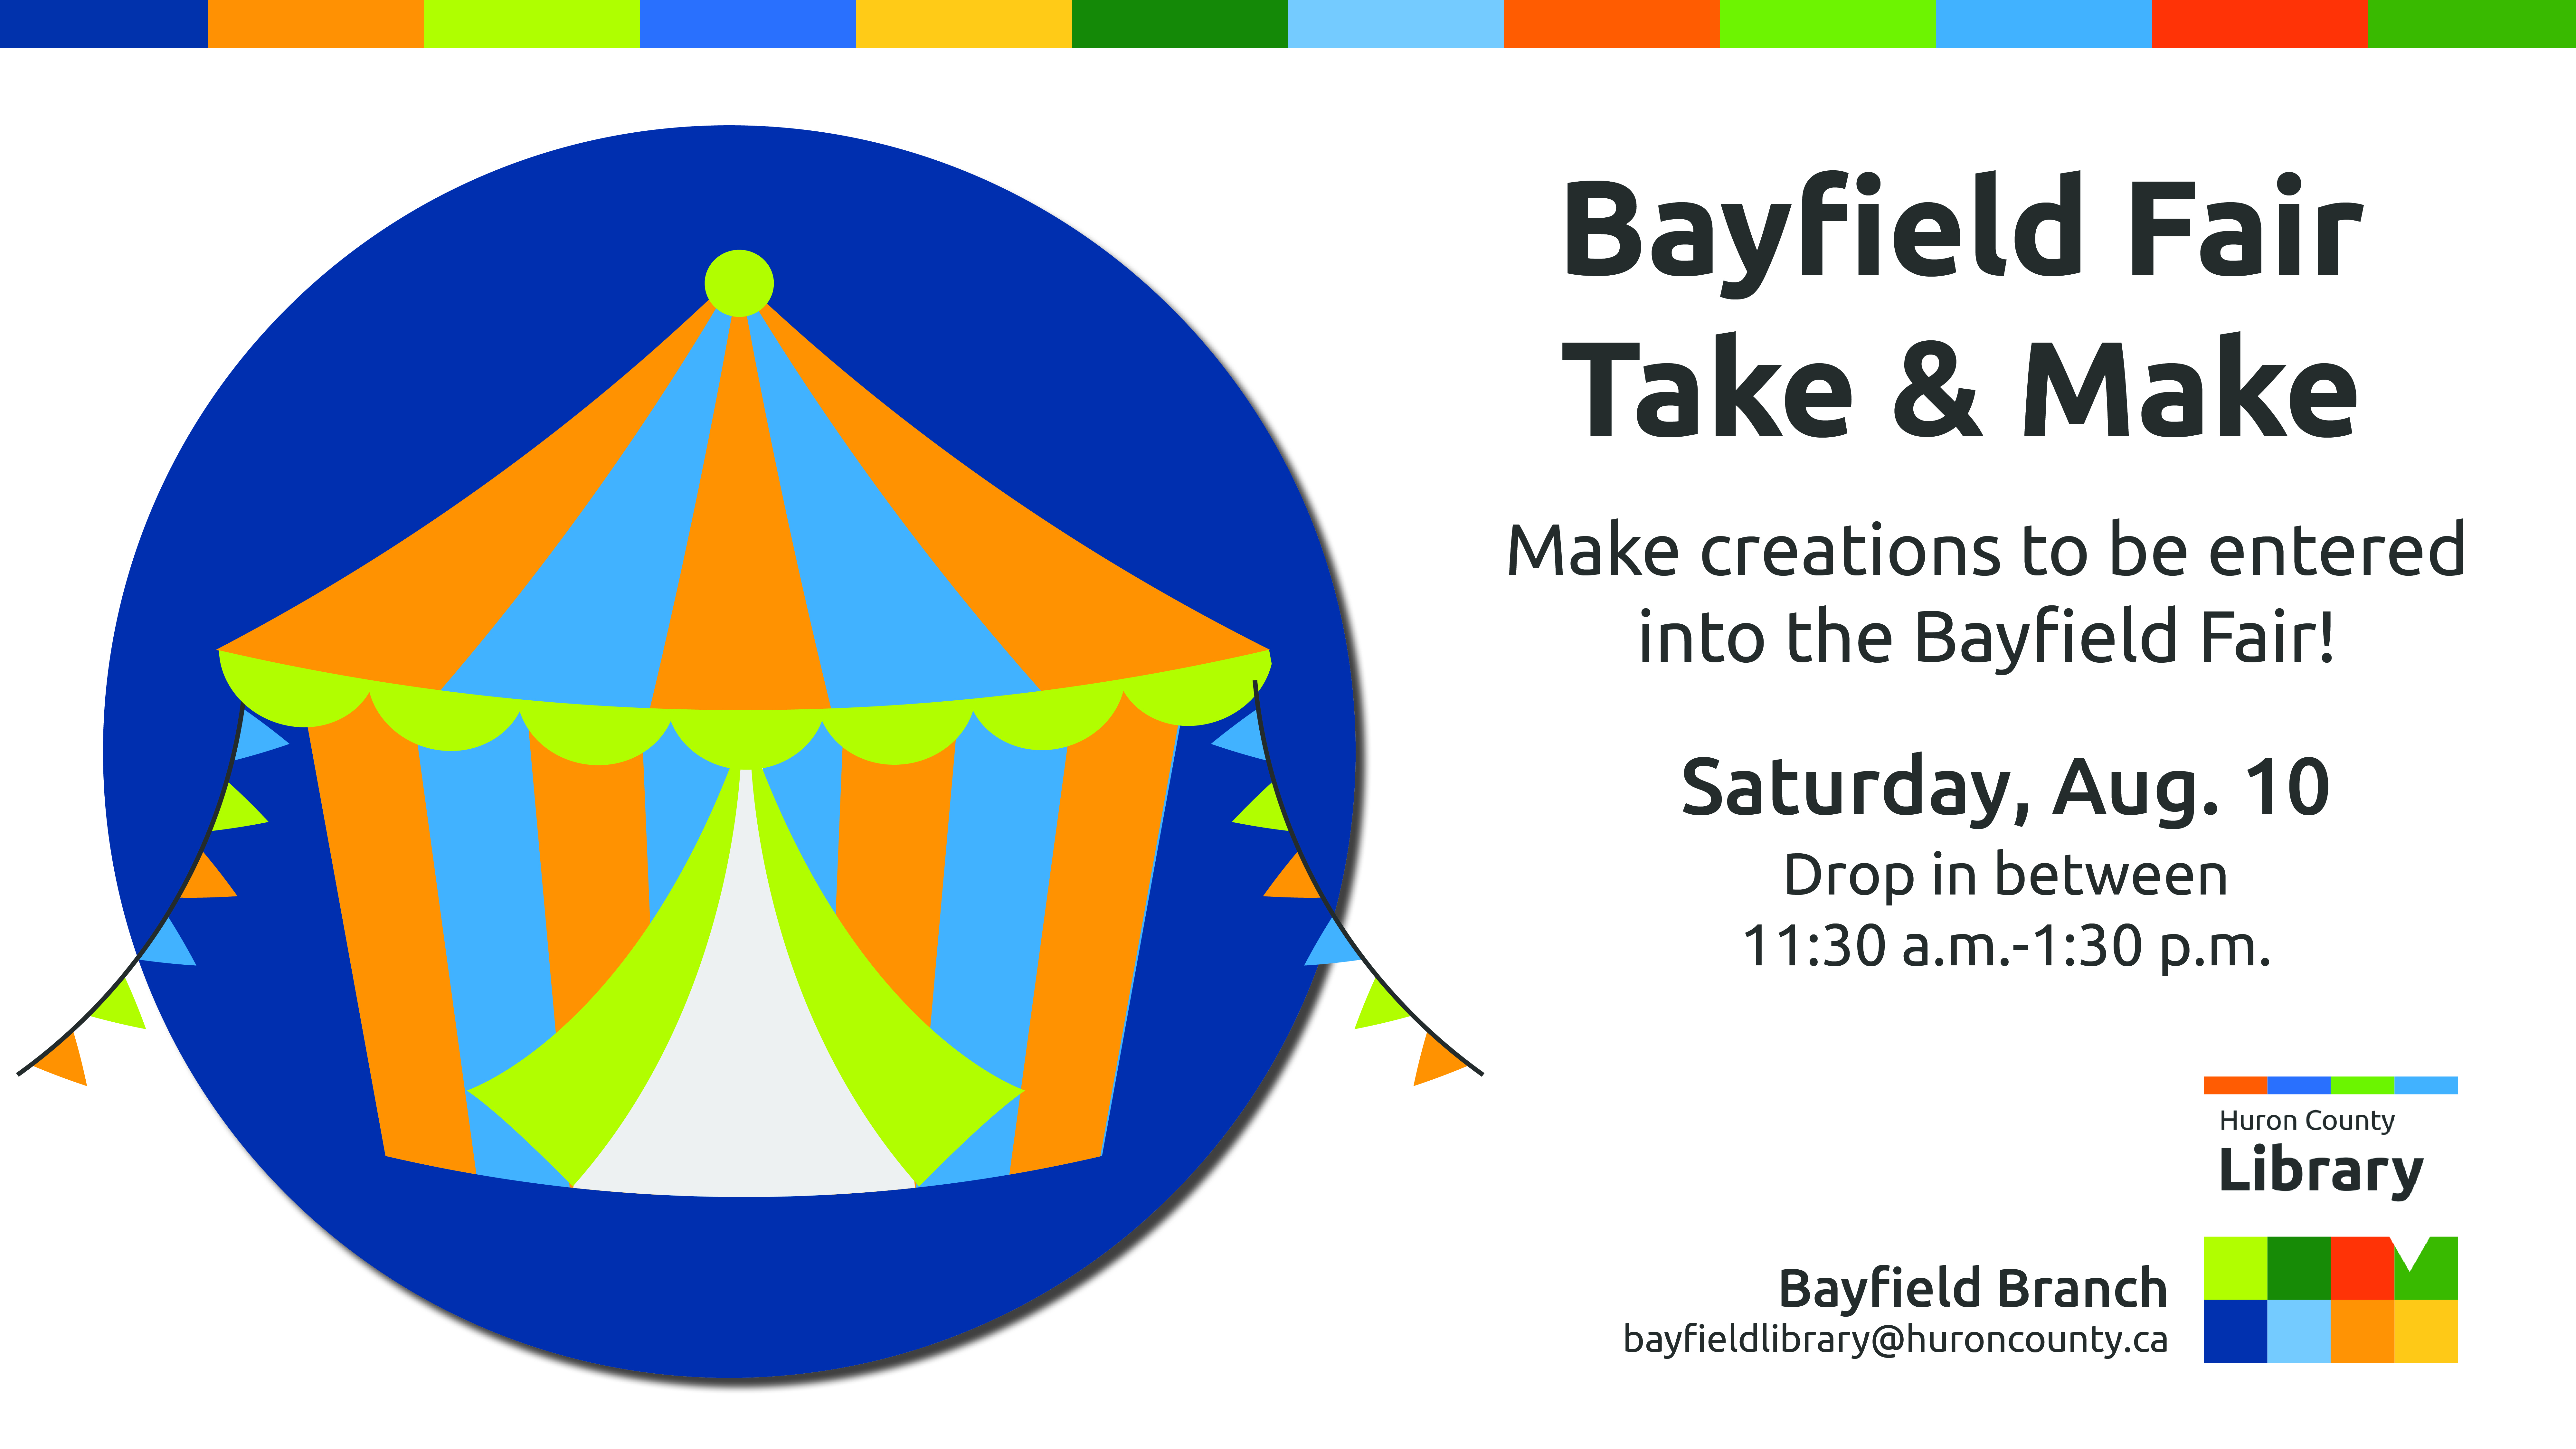 Illustration of a circus tent with text promoting Bayfield Fair Take & Make